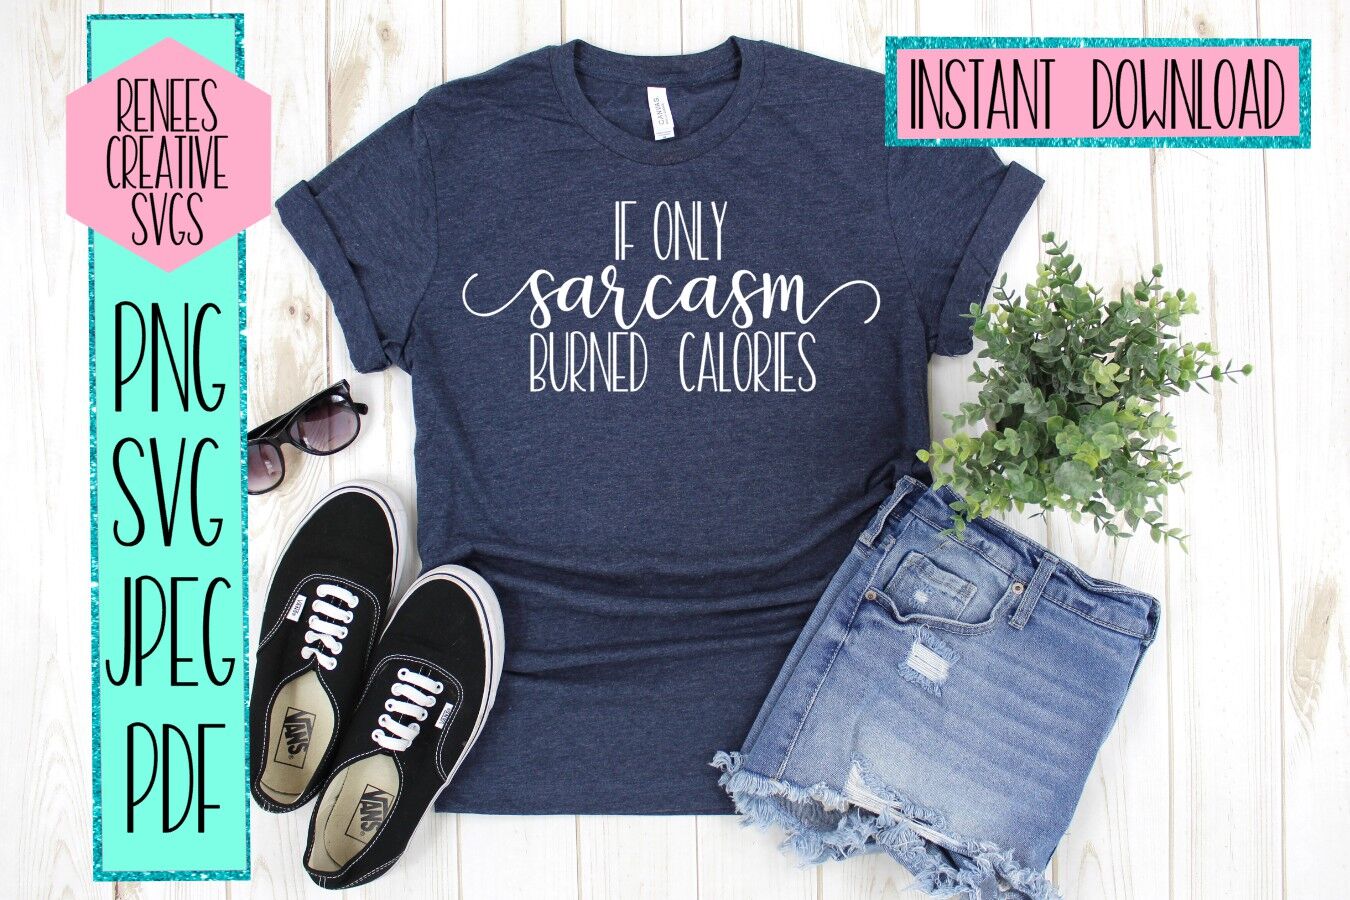 Download If only sarcasm burned calories | Humor | SVG Cutting File ...